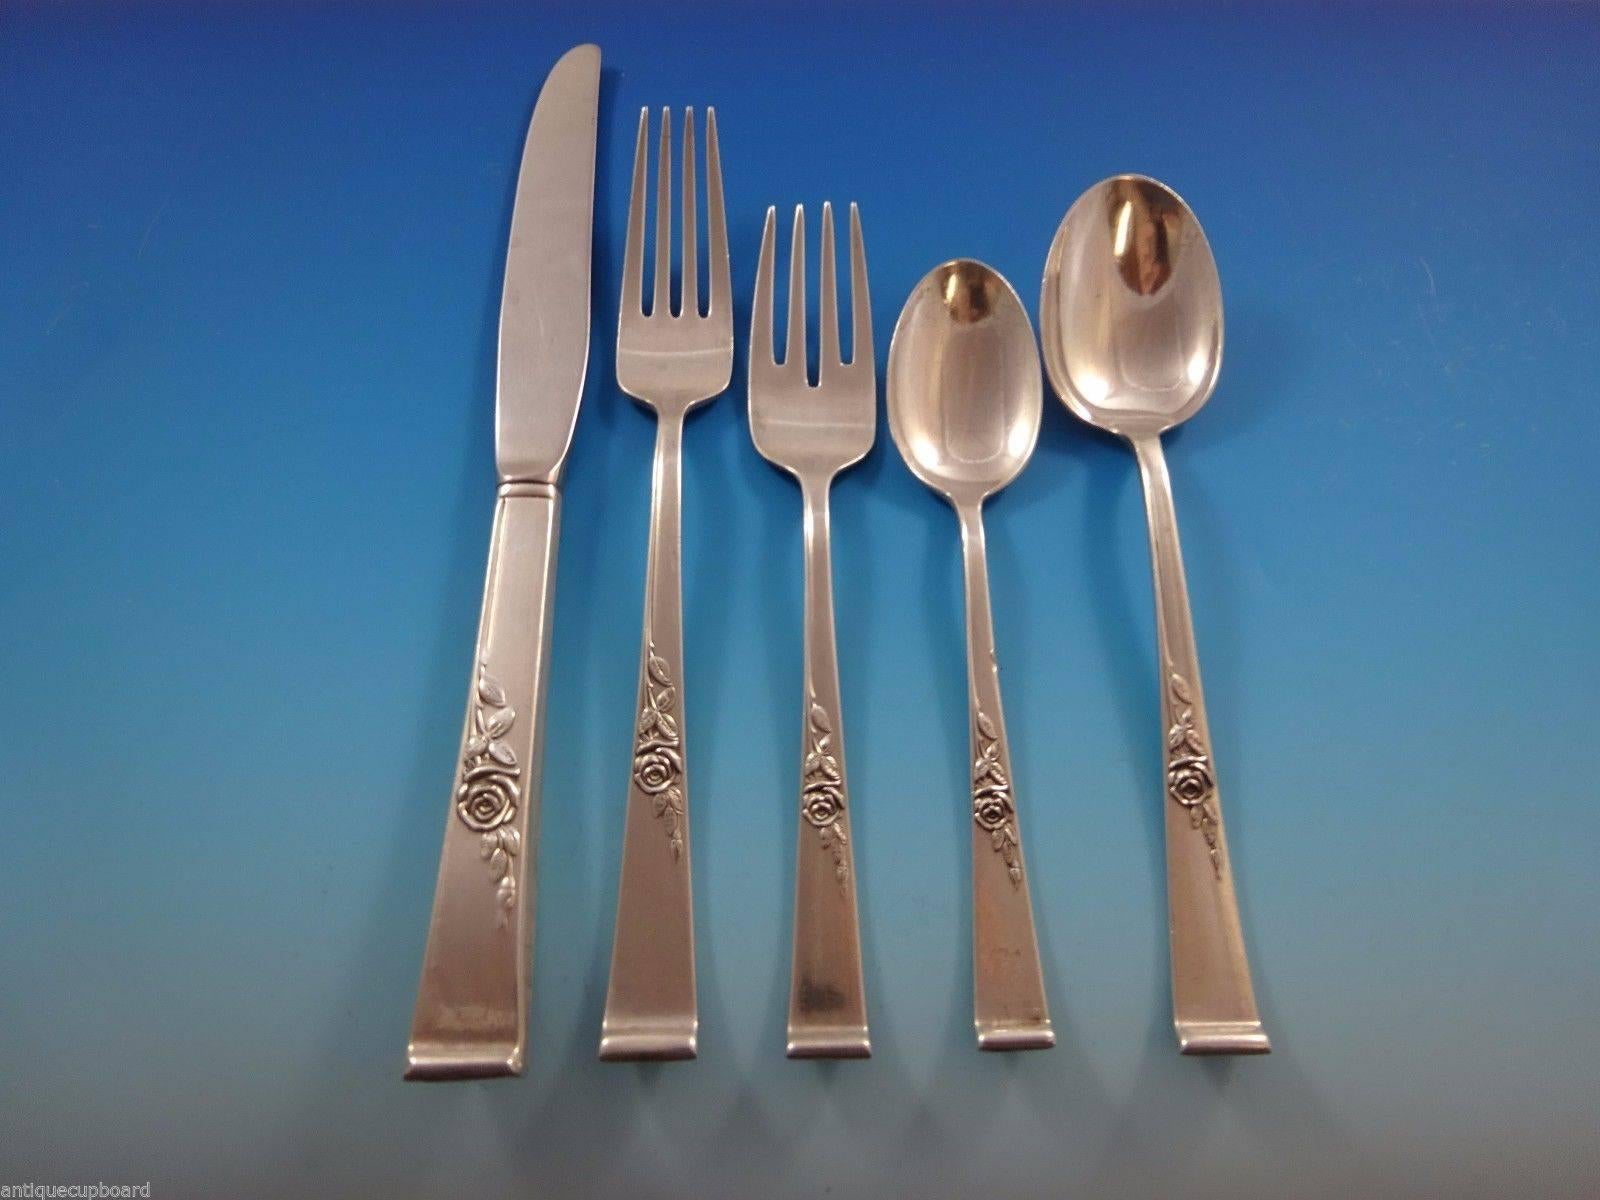 Beautiful Classic Rose by Reed & Barton sterling silver flatware set, 30 pieces. Great starter set! This set includes:

Six knives, 9 1/8